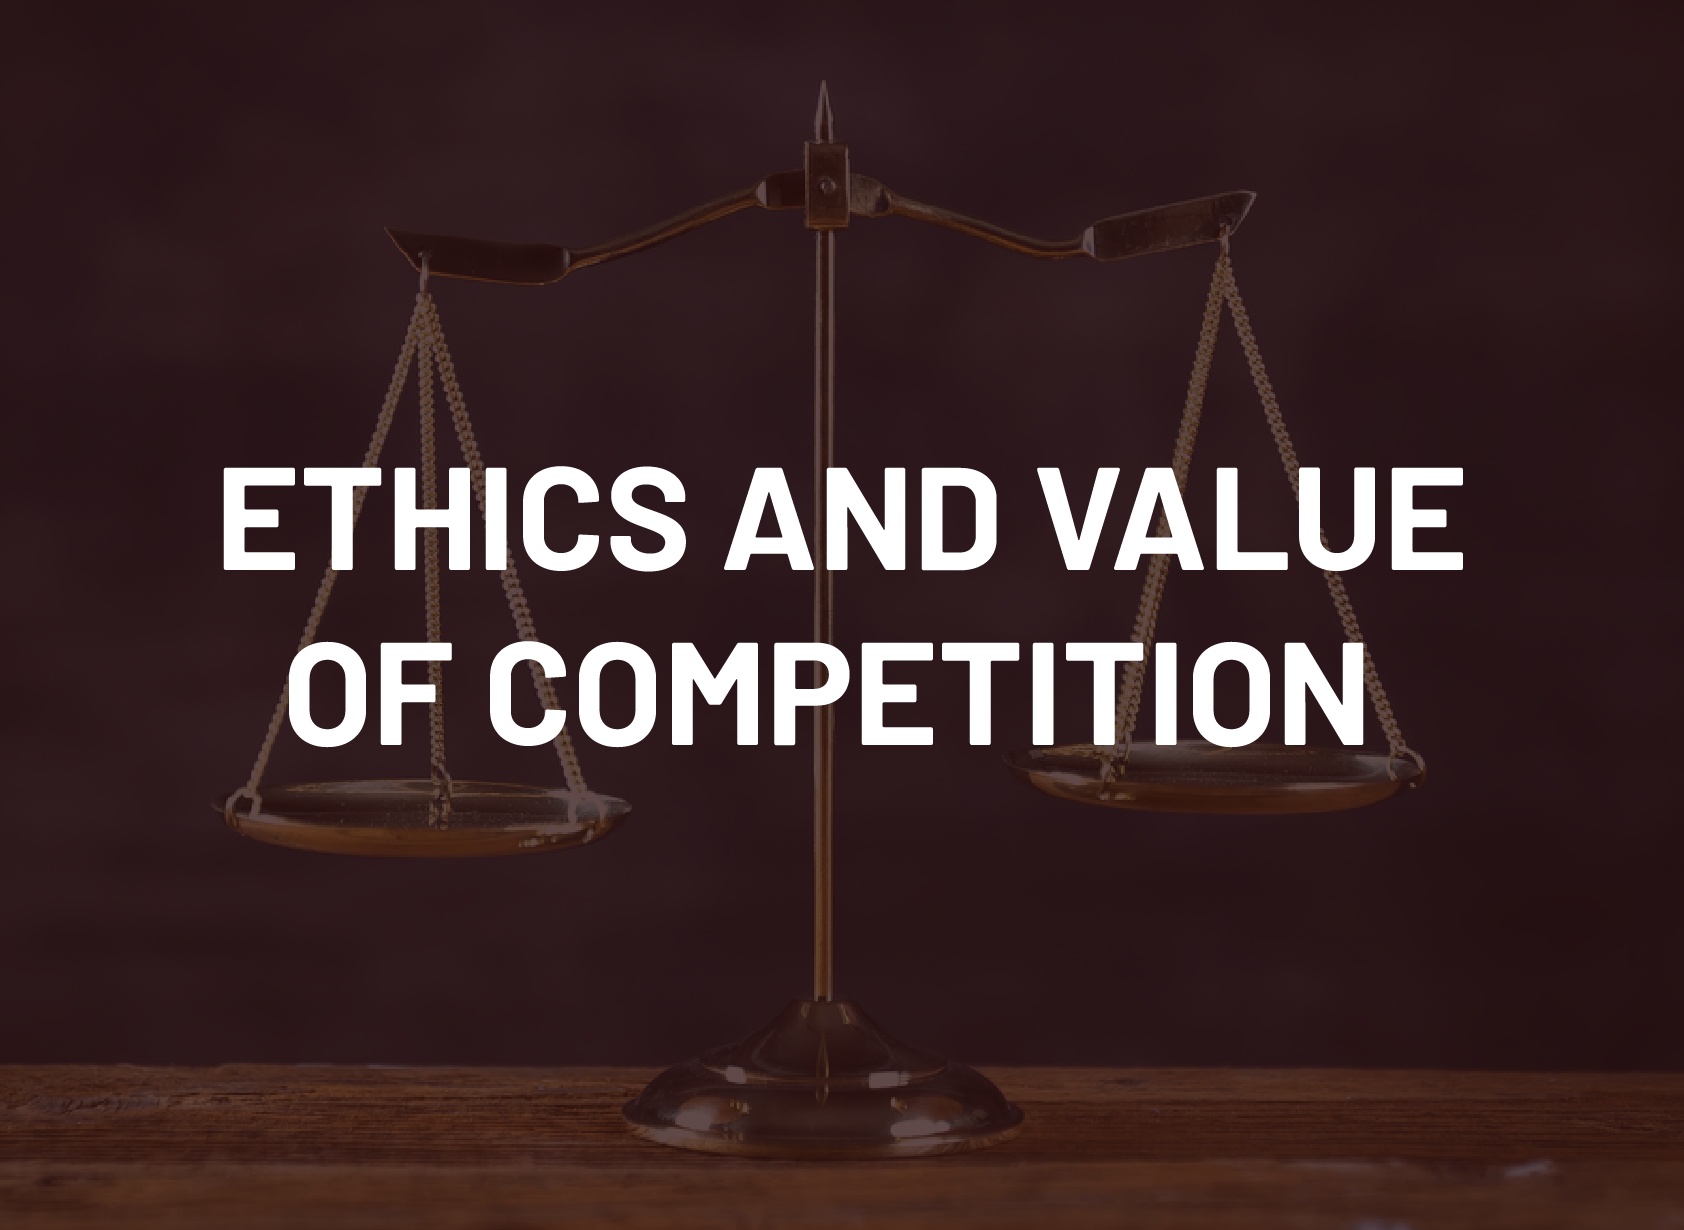 Ethics and Value of Competition